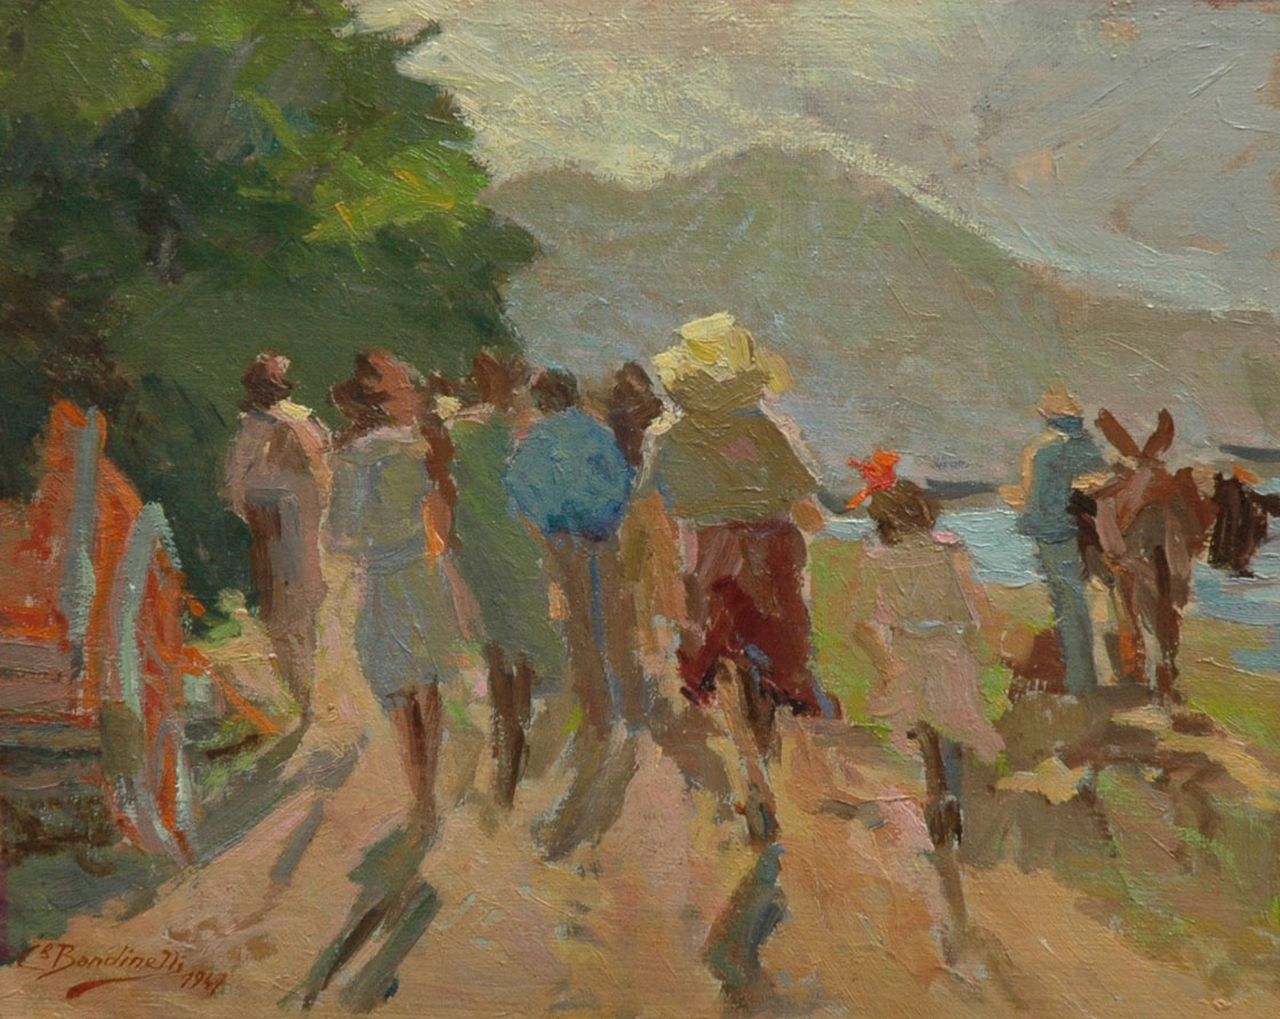 Aldo Bandinelli | A walk in the countryside, oil on canvas laid down on board, 25.5 x 31.5 cm, signed l.l. and with monogram on the reverse and dated 1947